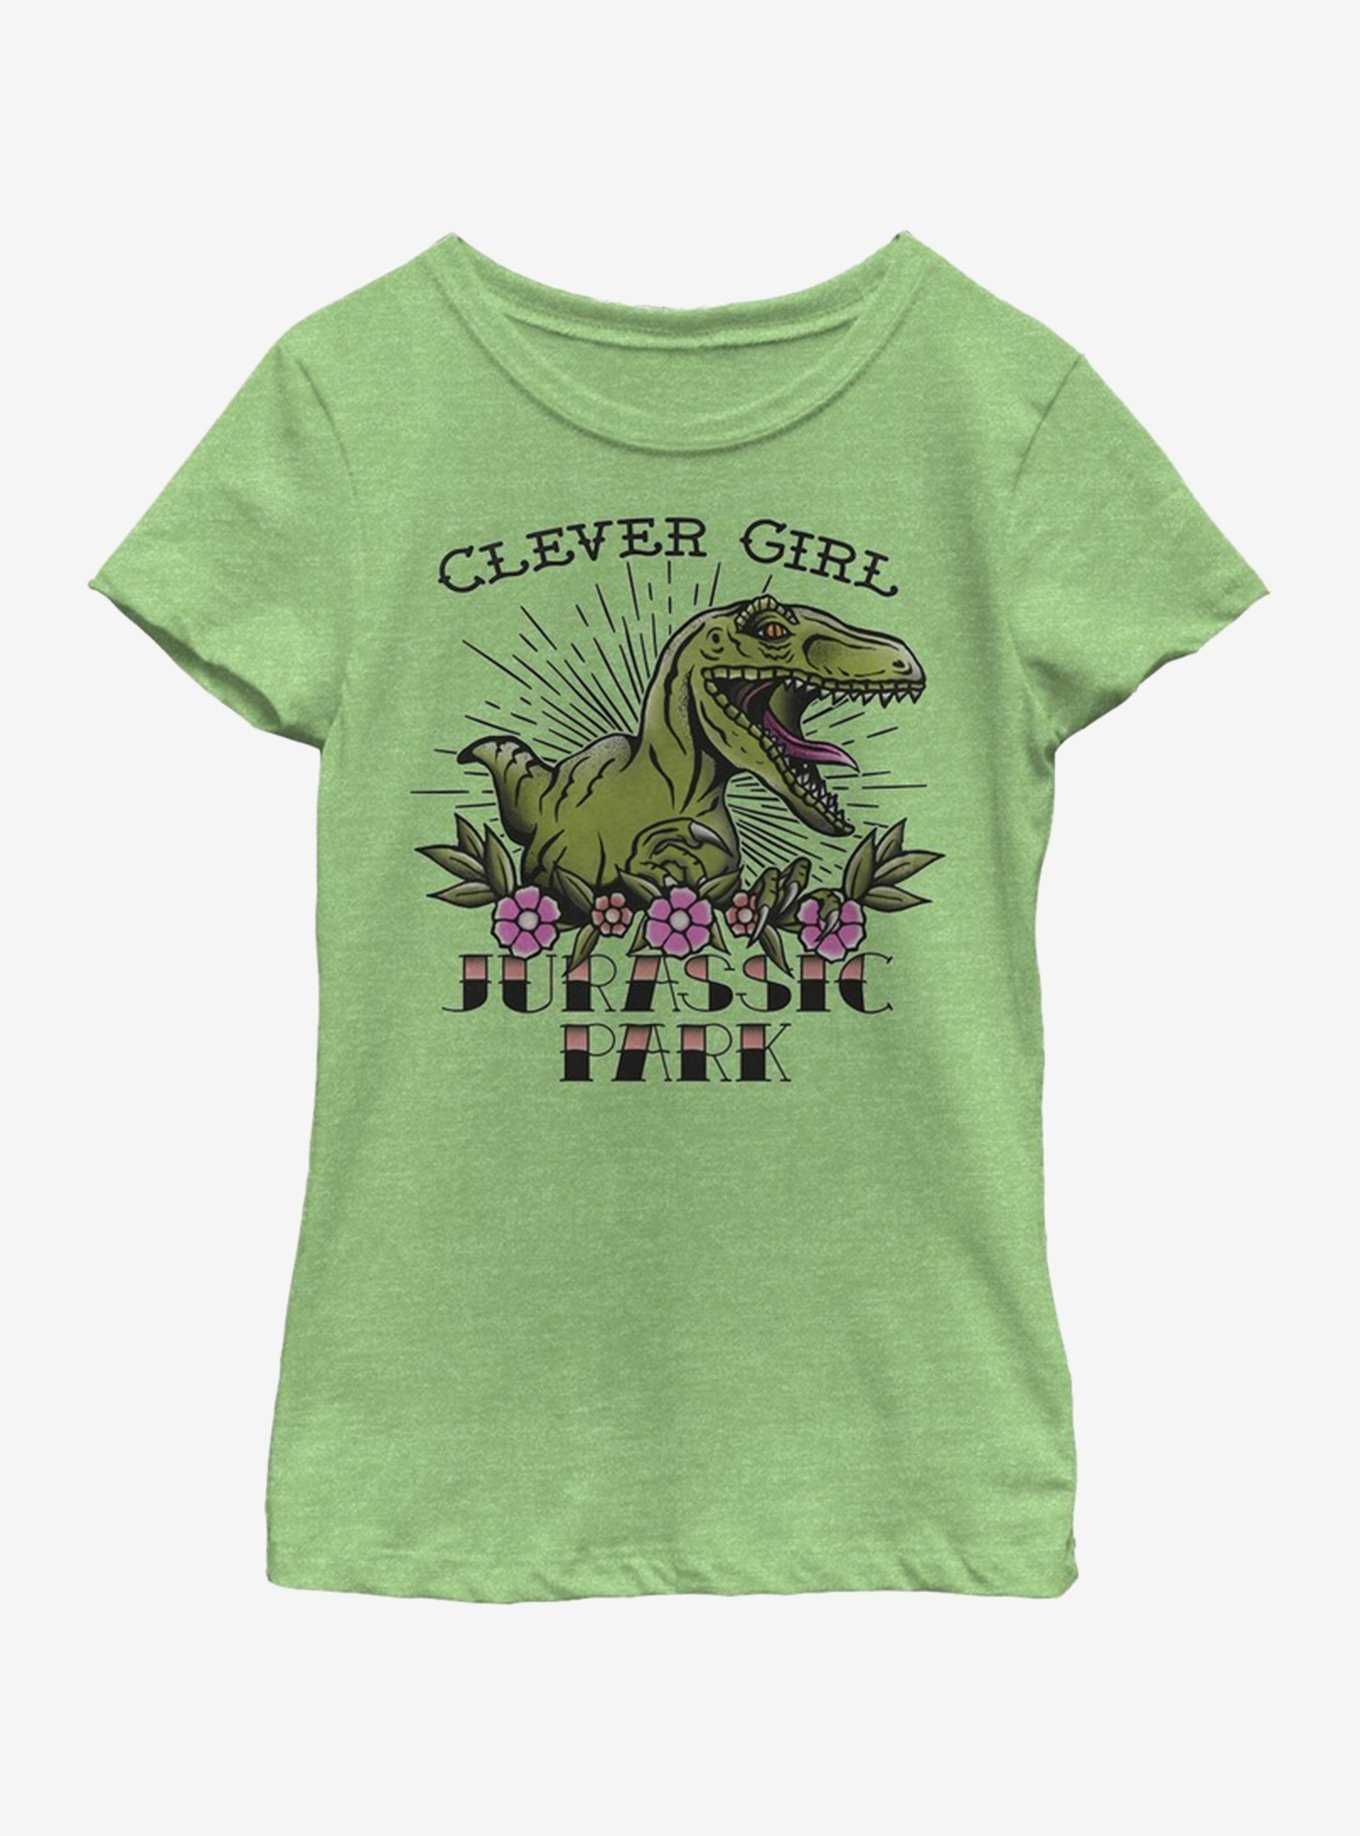 Jurassic Park Clever Girl Youth Girls T-Shirt, , hi-res